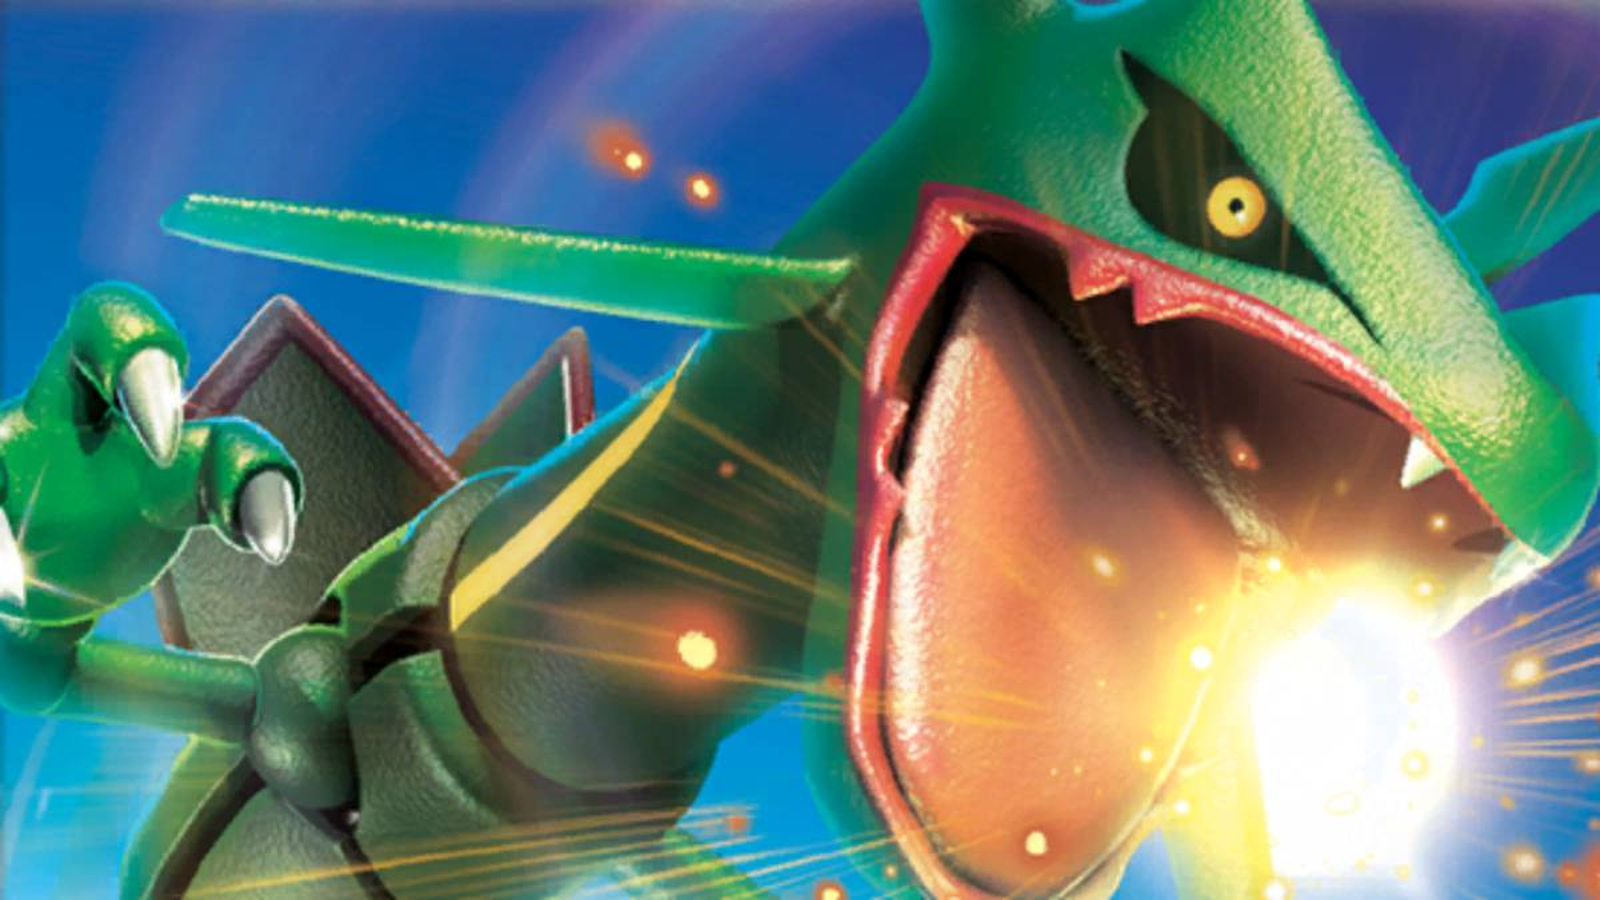 Let's have a little fun, shall we? — Shiny Rayquaza raid trailer!